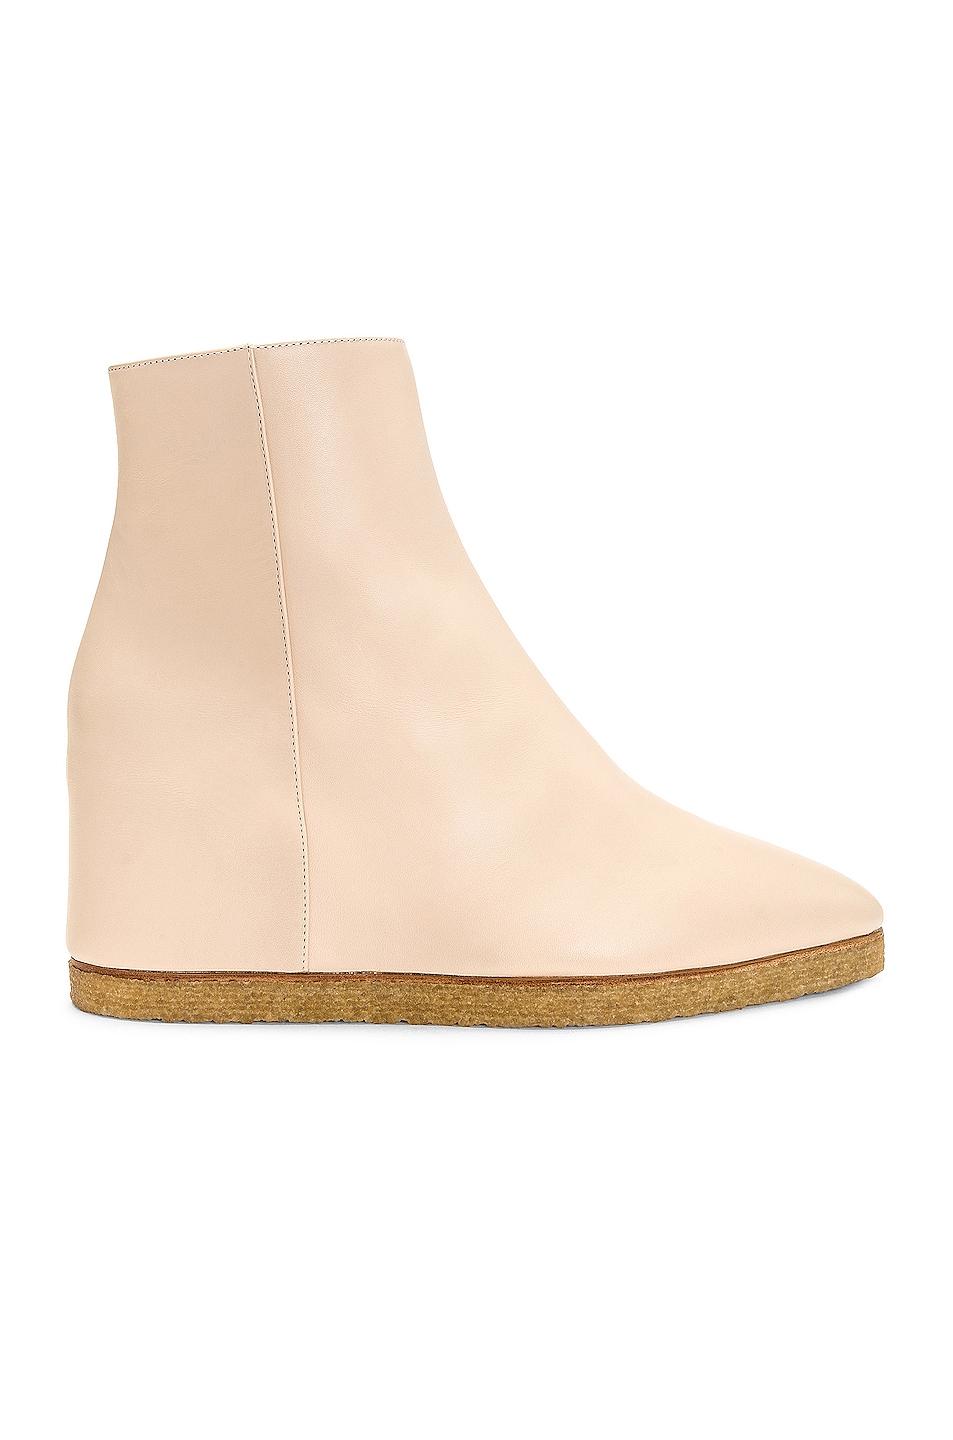 Image 1 of Chloe Moreen Ankle Boots in Pearl Beige